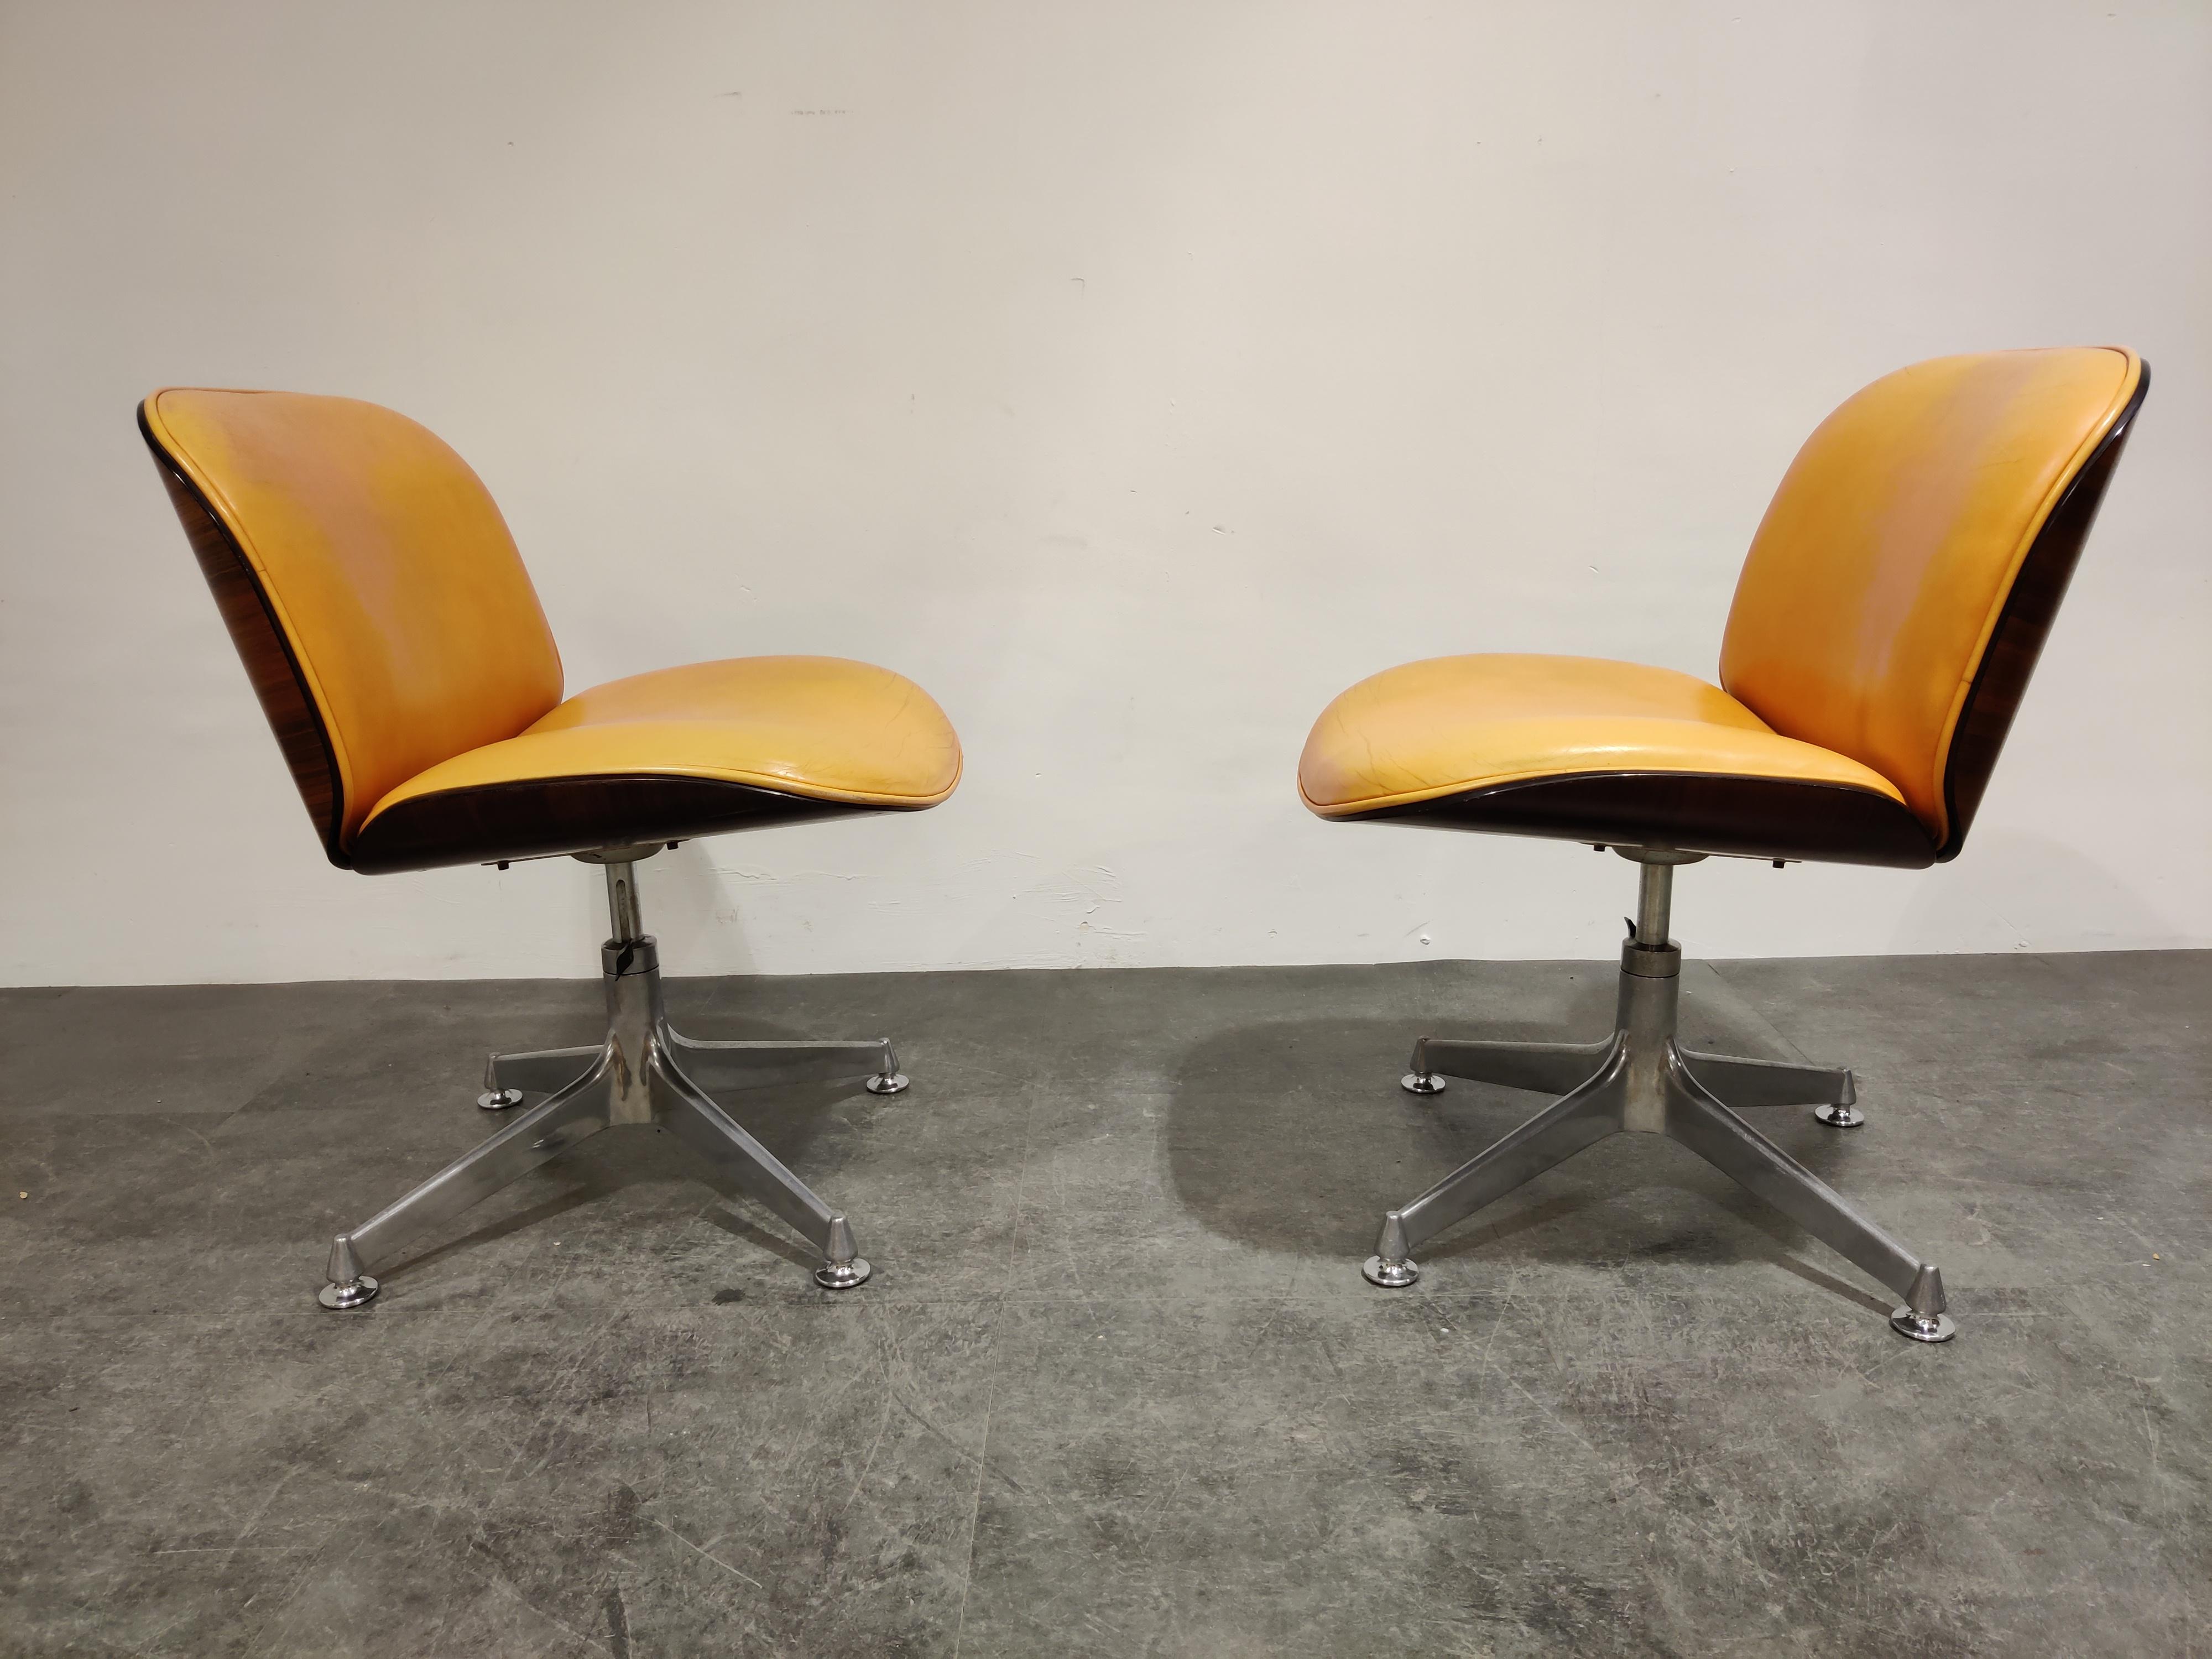 Italian Midcentury Swivel Chairs by Ico Parisi for MIM, Italy, 1960s